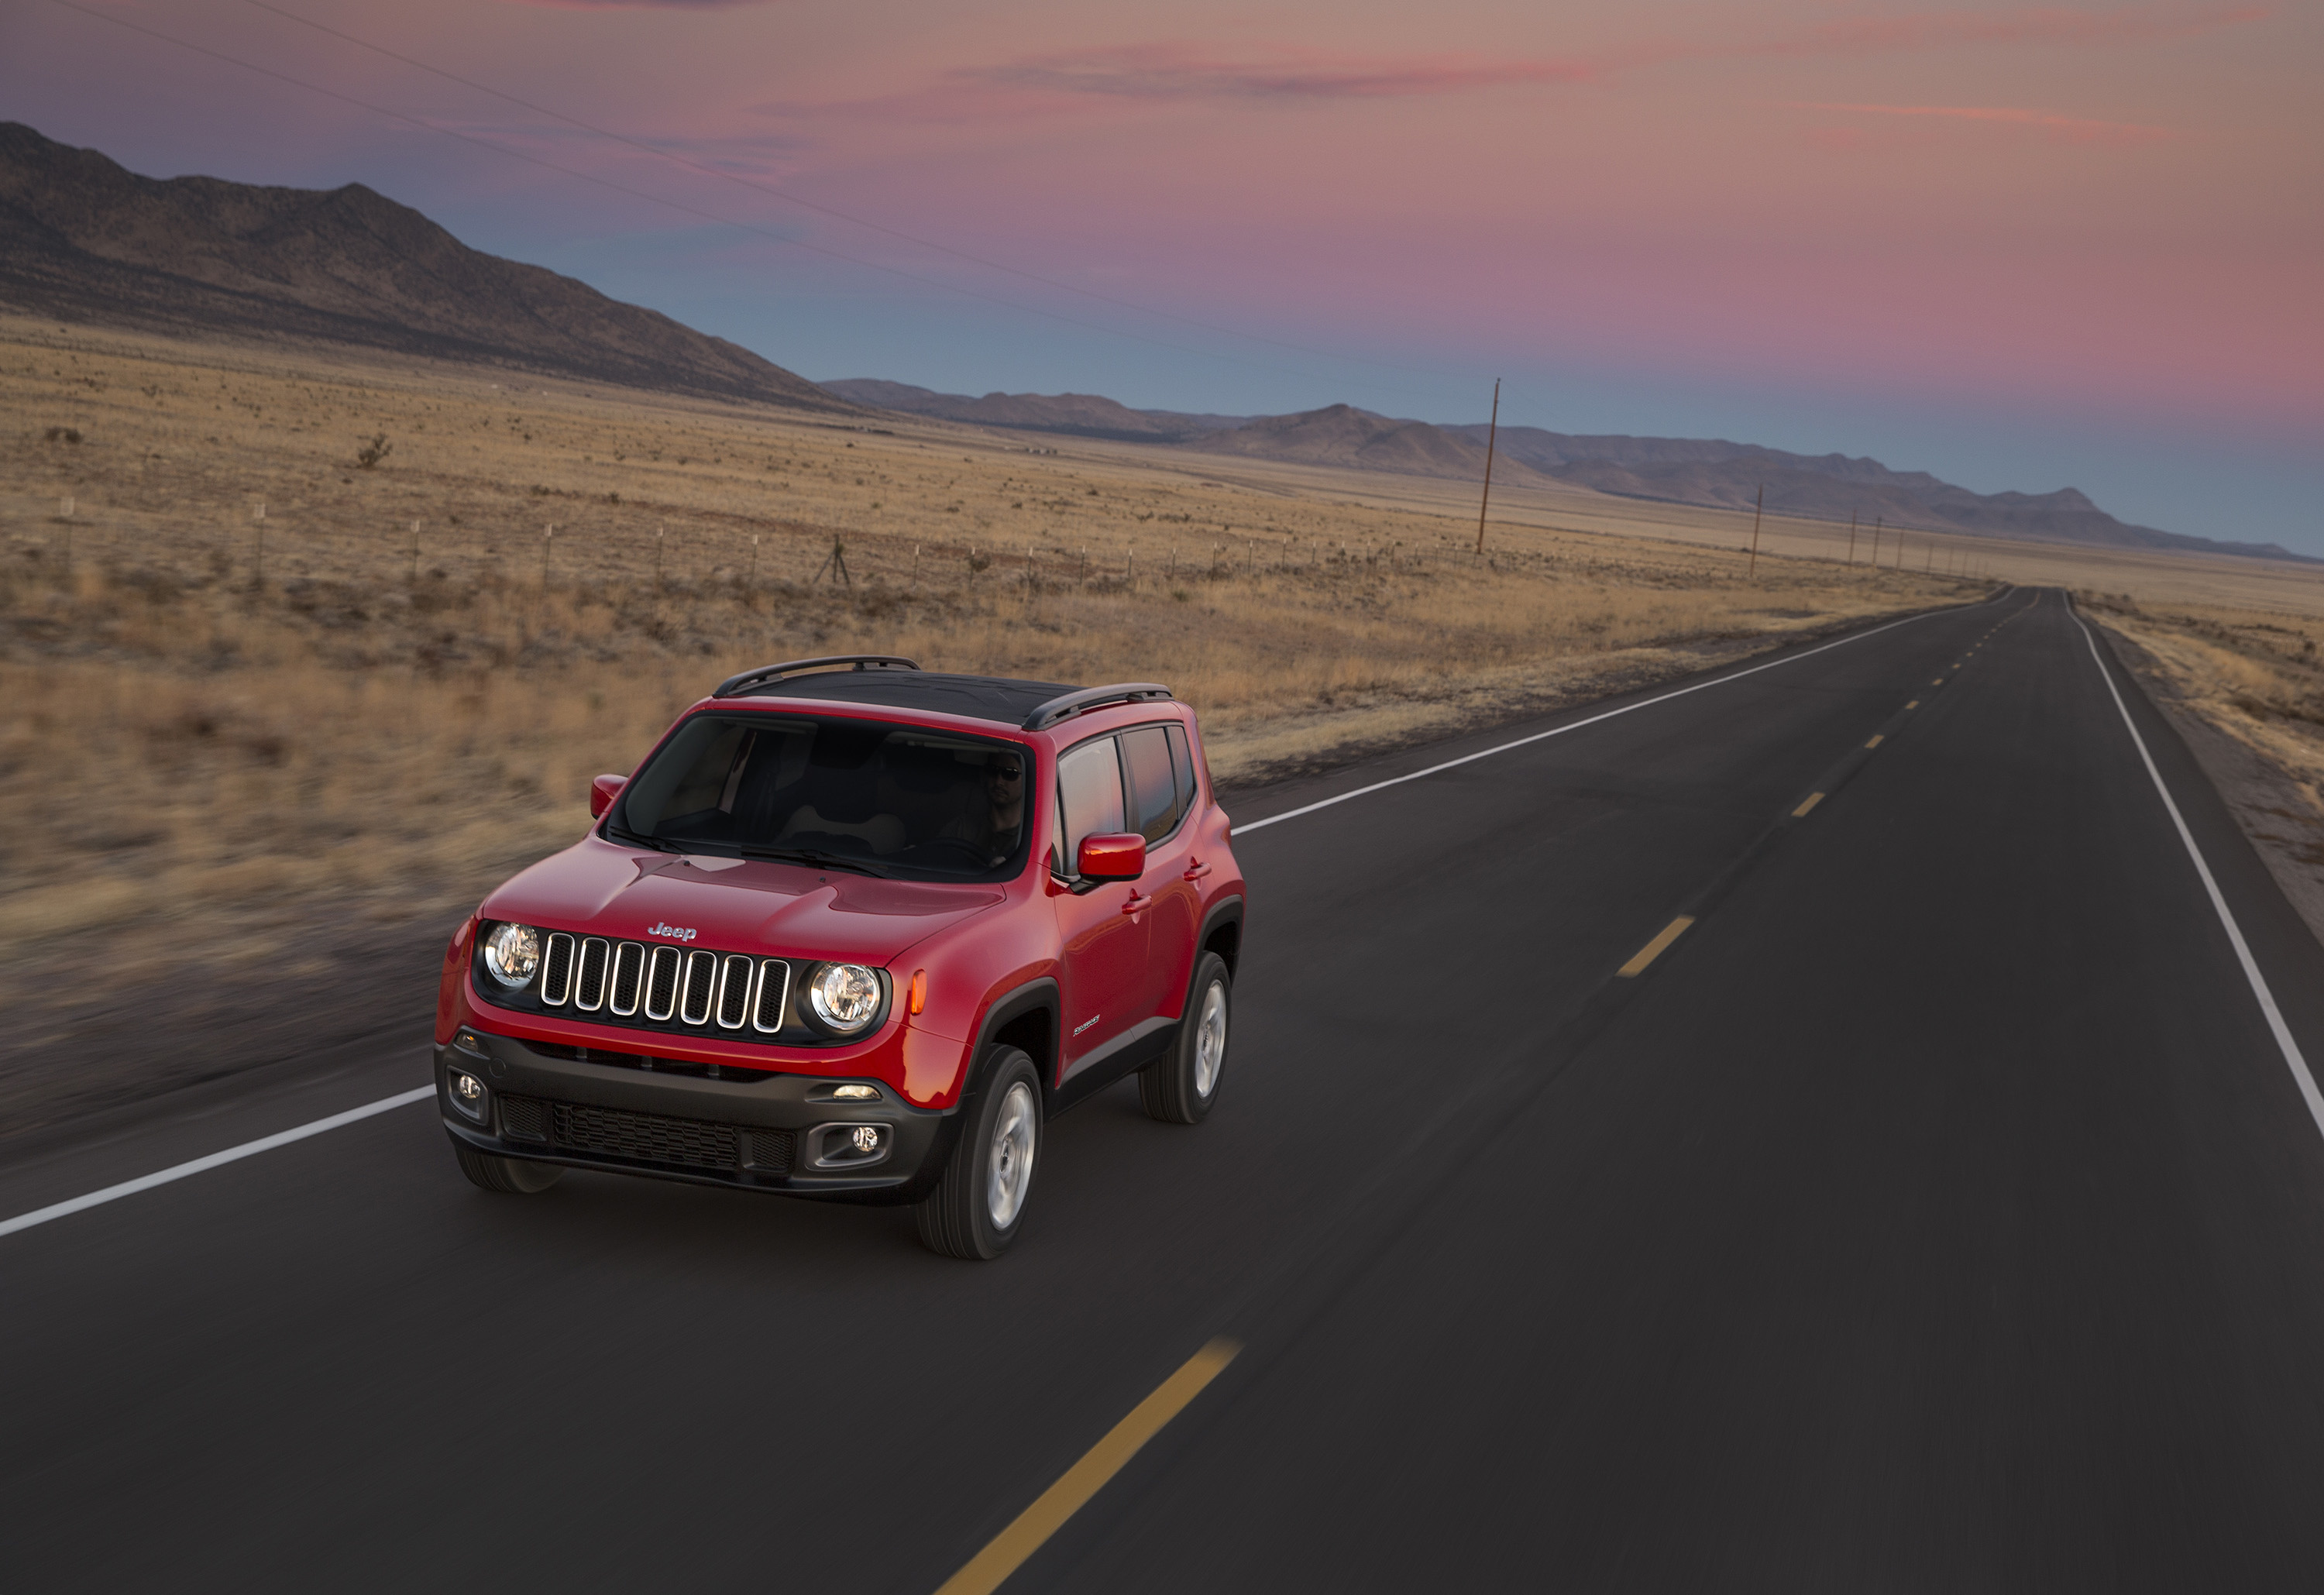 Jeep Renegade, Dynamic driving, Off-road capability, Automotive photography, 3000x2060 HD Desktop